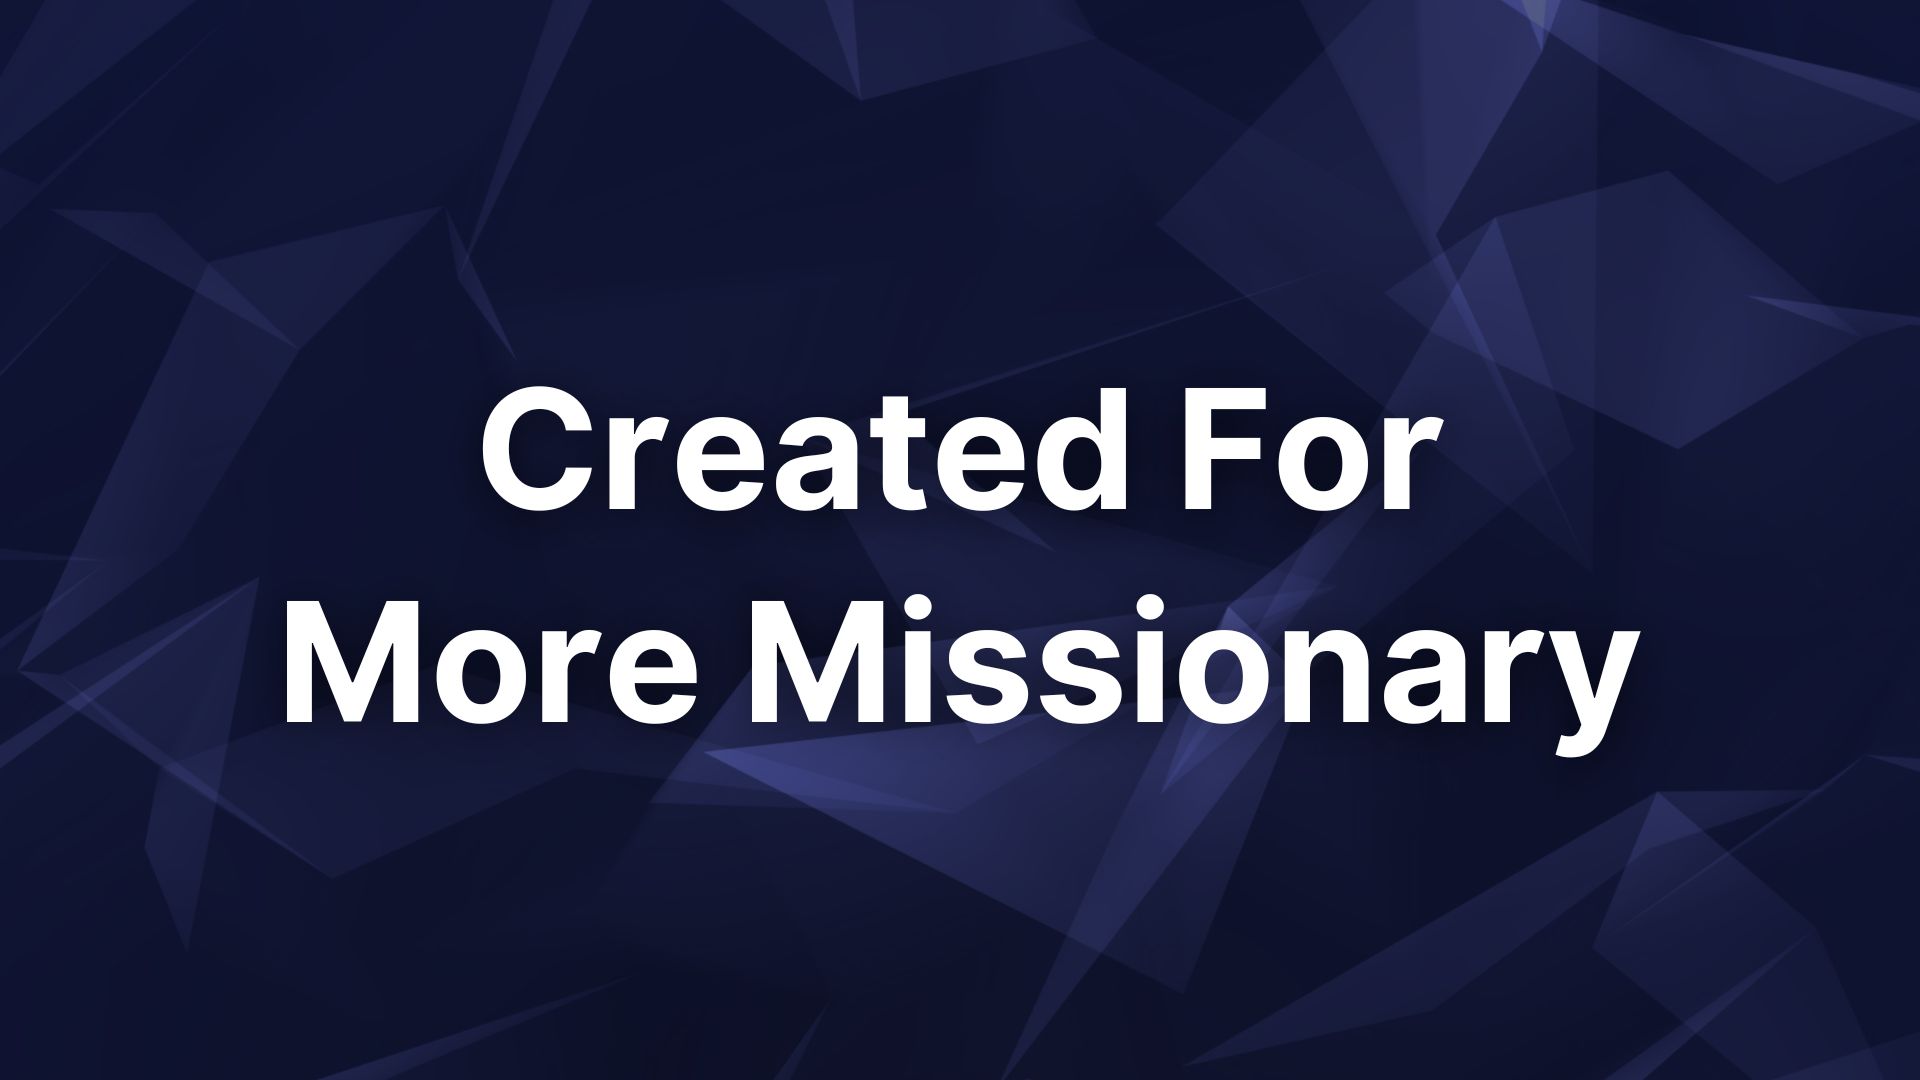 Created For More Missionary